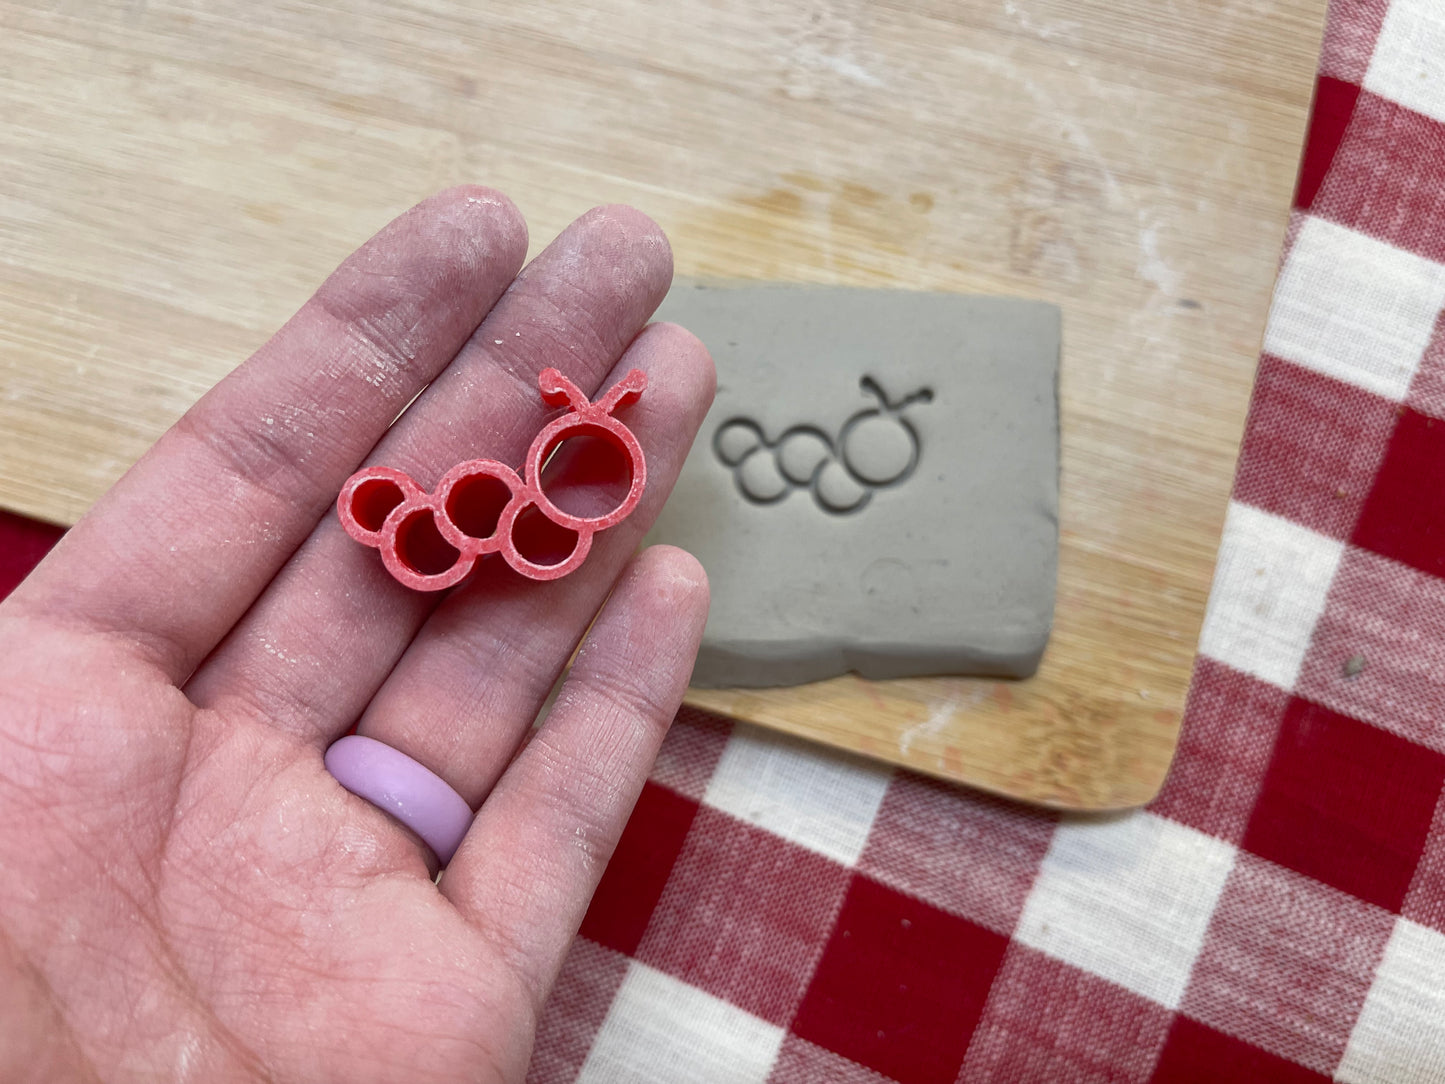 Caterpillar Mini Pottery Stamp - July 2022 Stamp of the Month, plastic 3D printed, multiple sizes